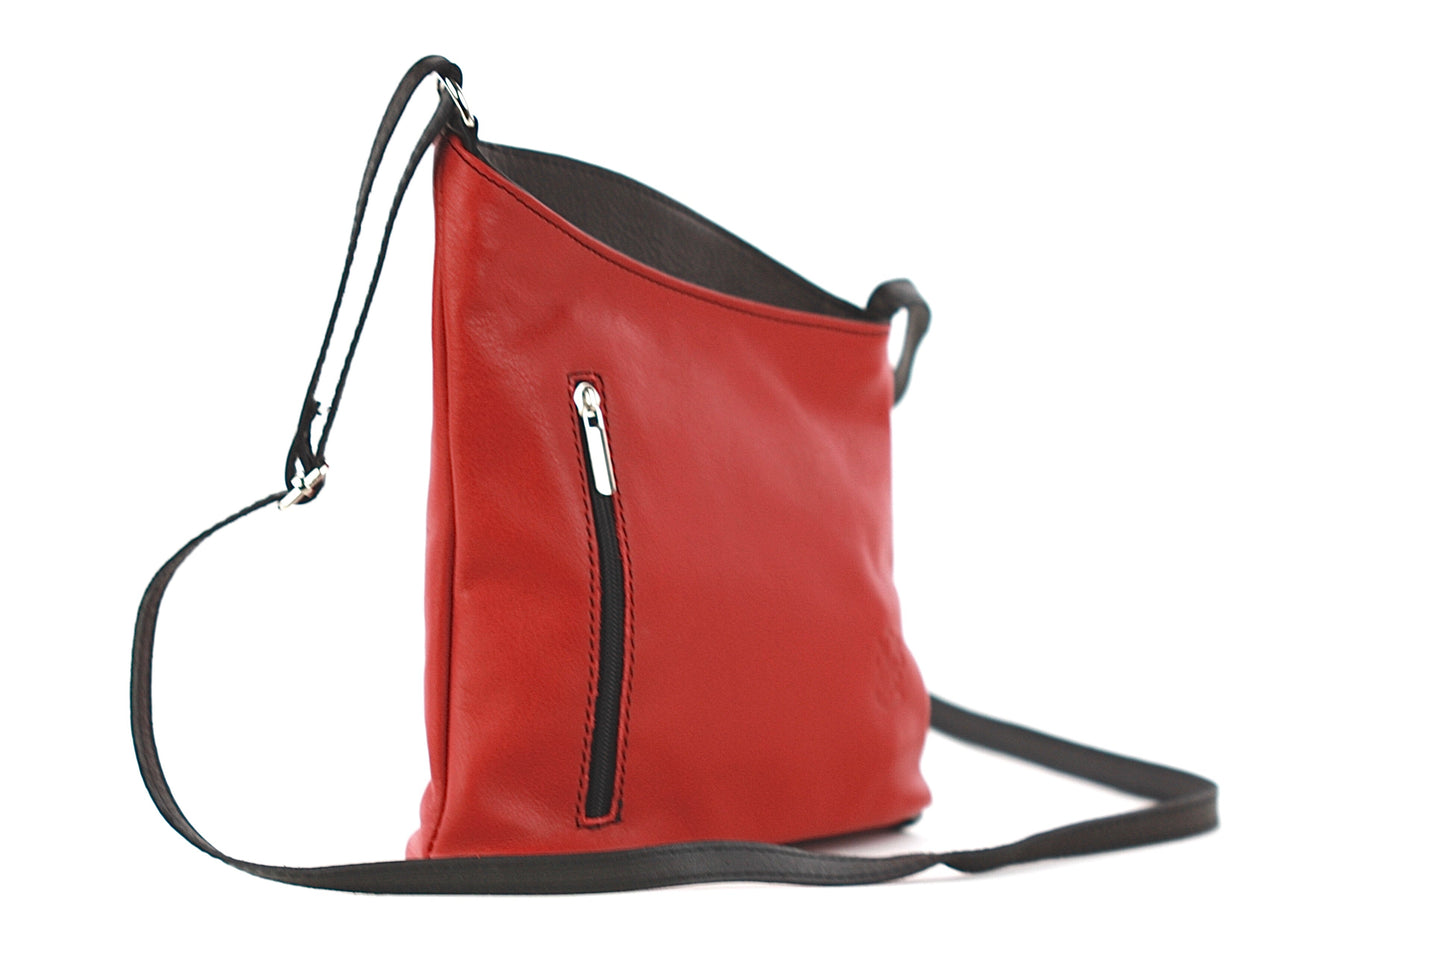 Miriam bag in red and black